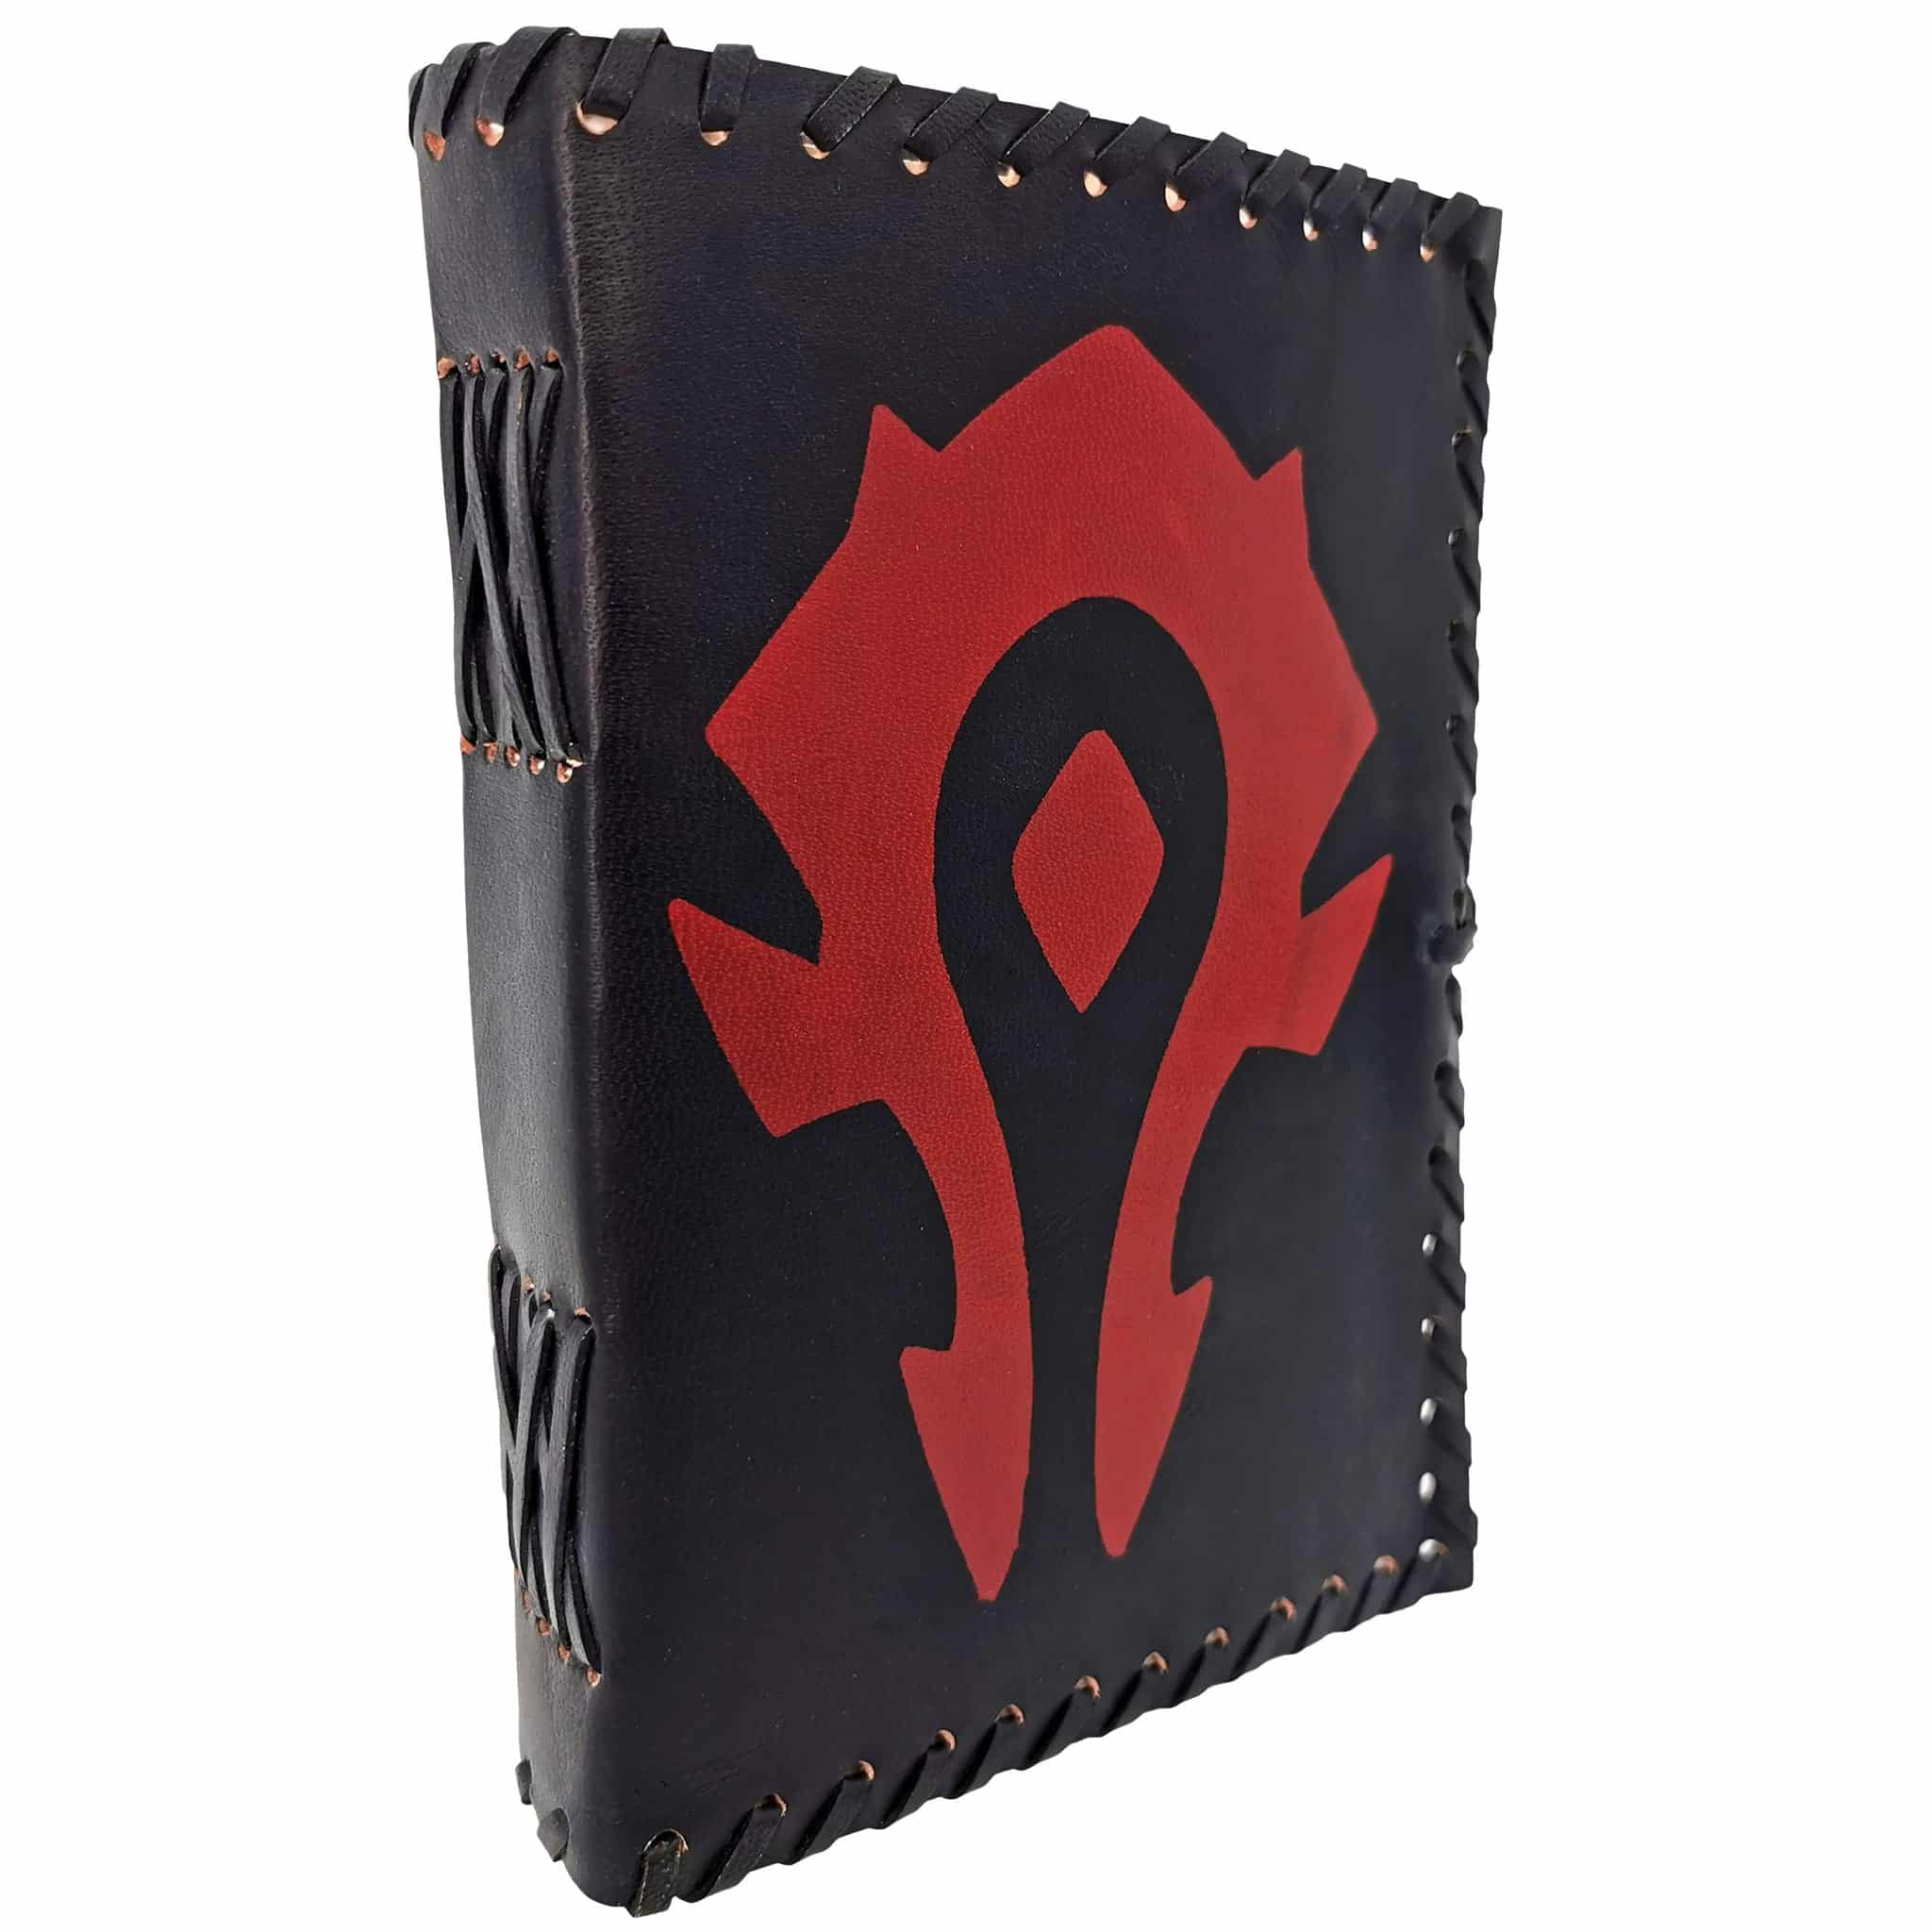 Mythrojan for The Horde Black Warcraft Medieval Leather Journal 5 x 7 inches Diary Notebook